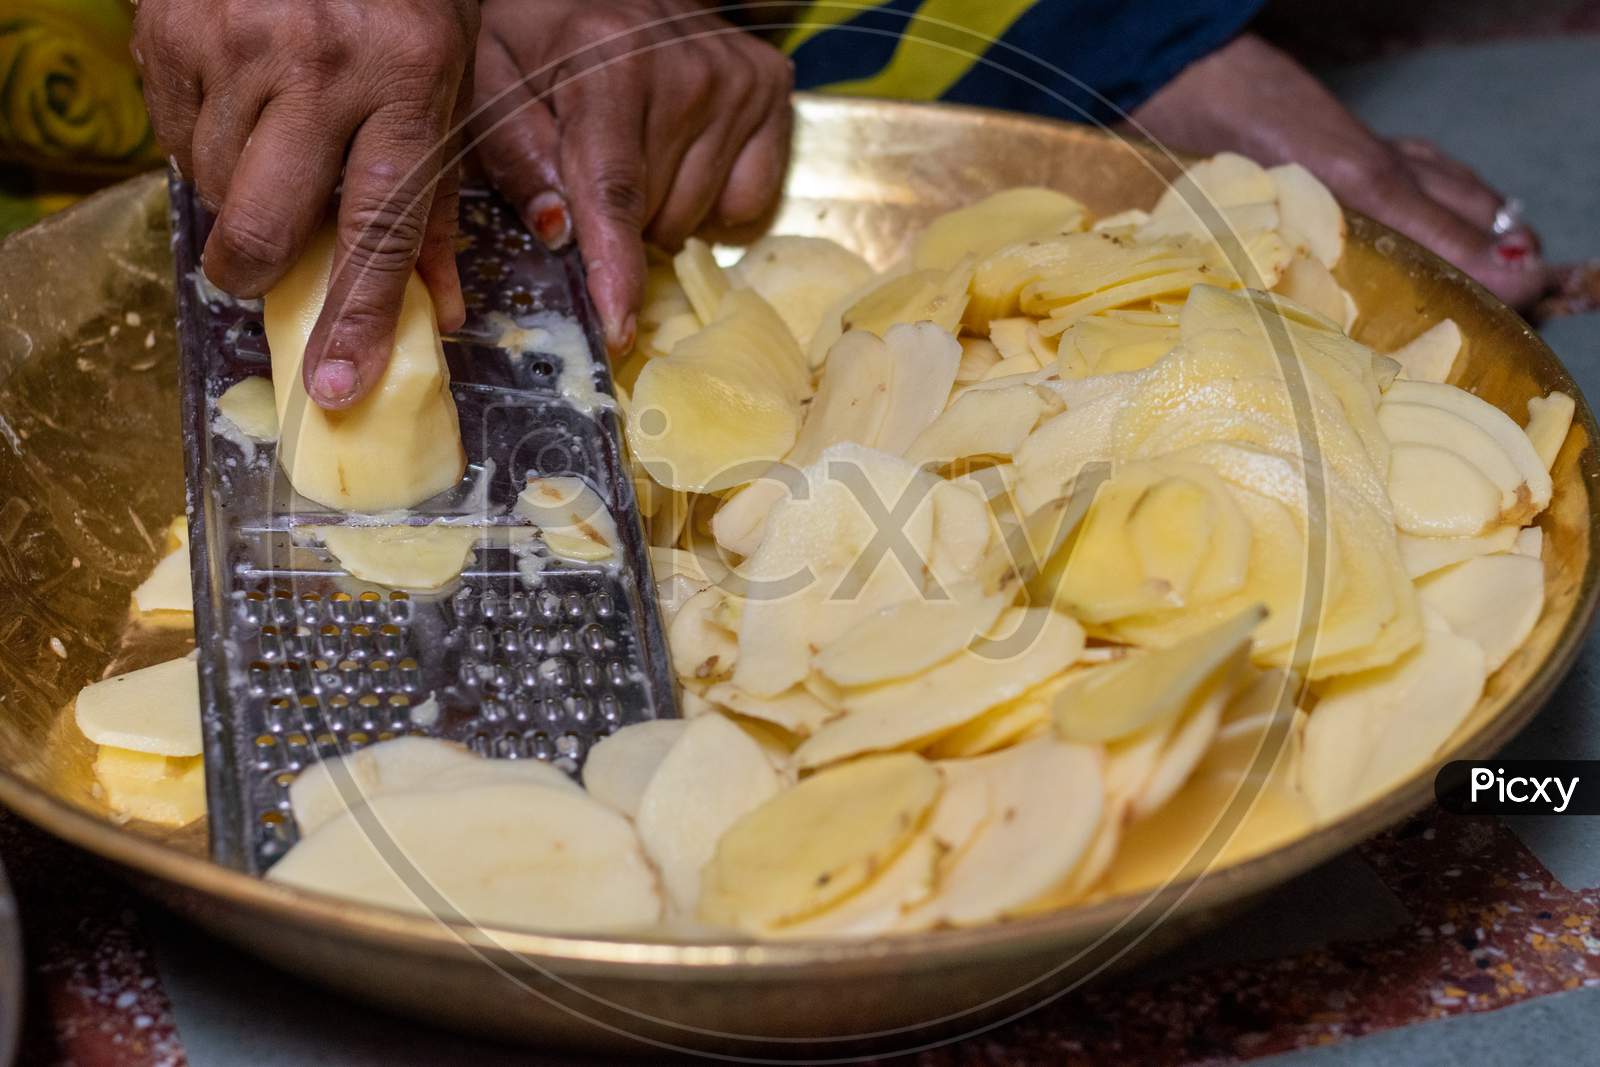 A woman prepares potato chips using chips maker at home